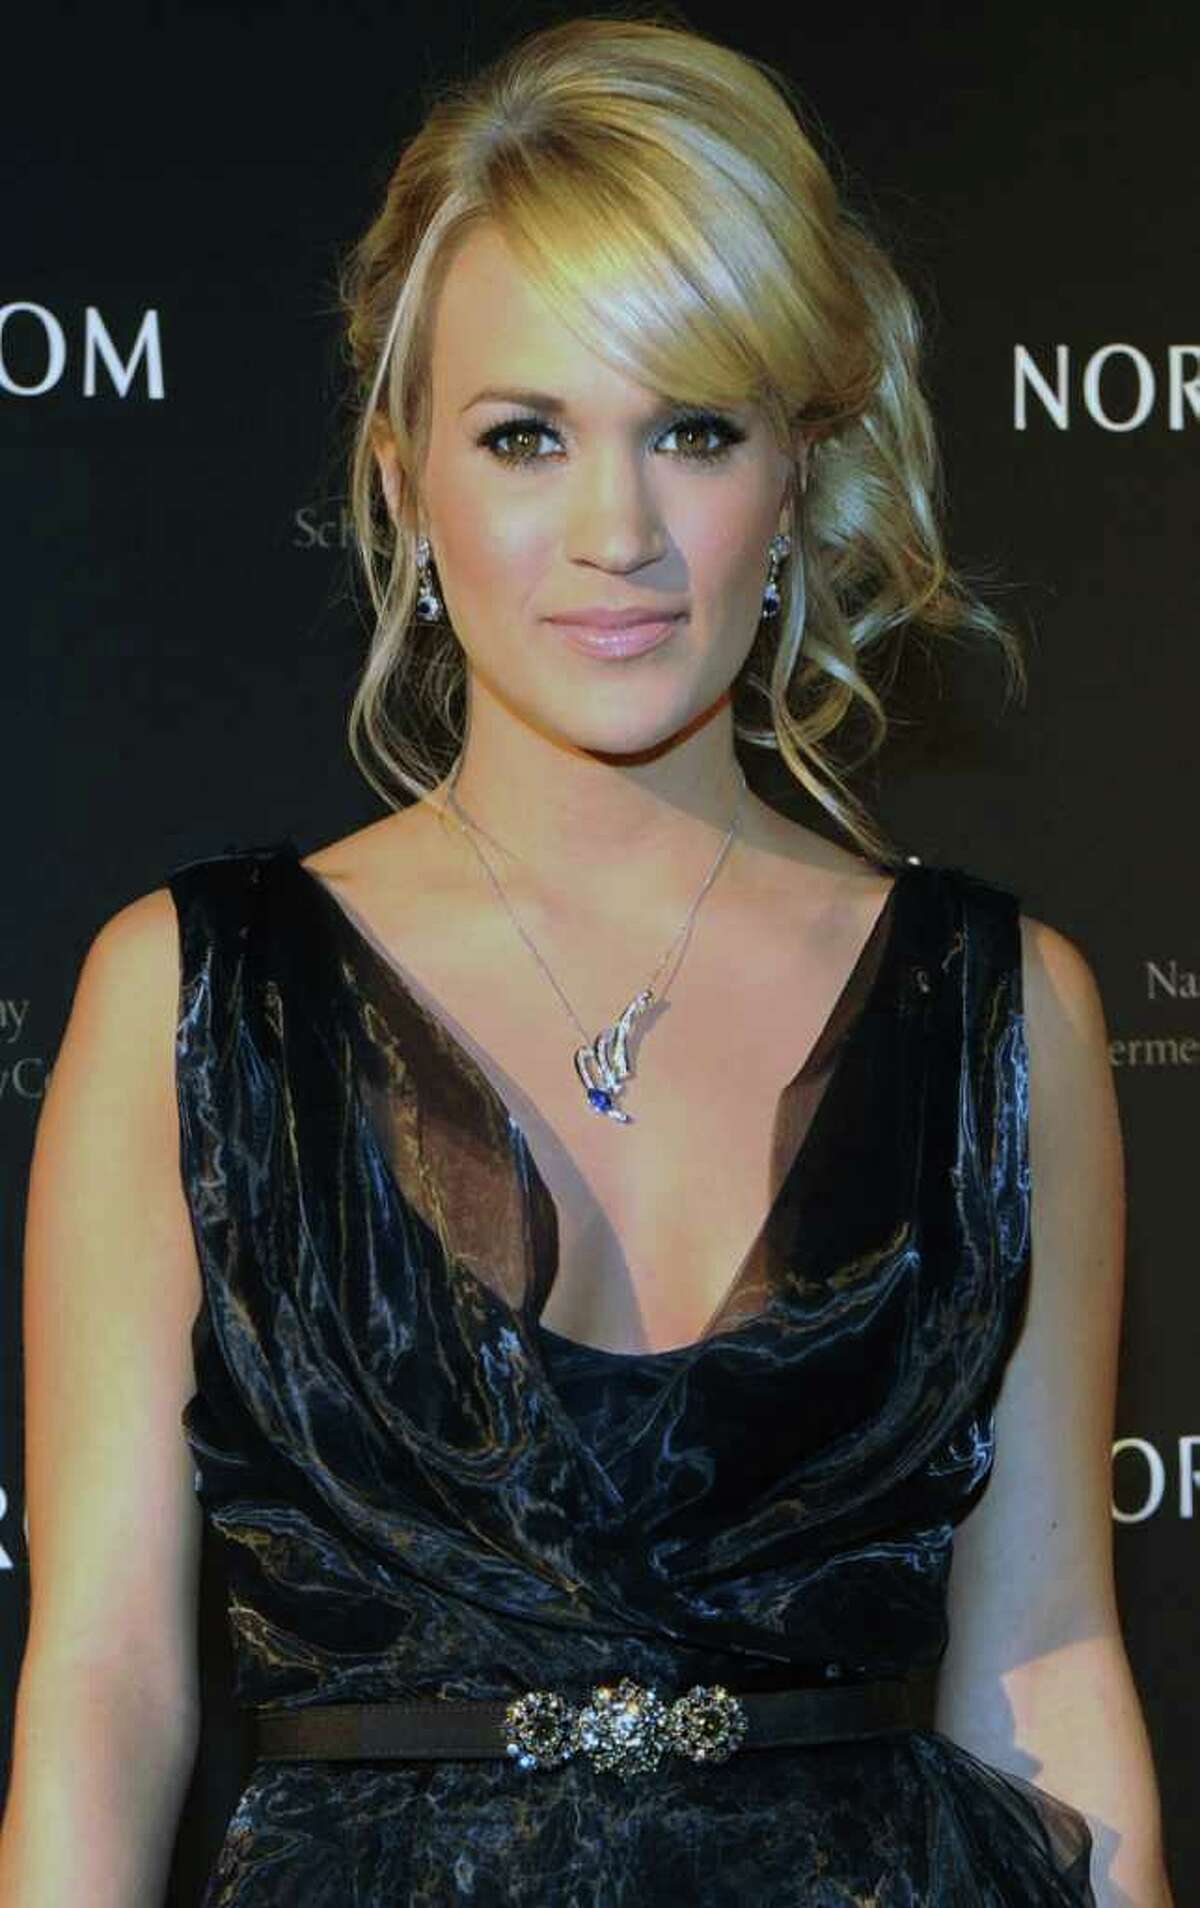 NASHVILLE, TN - FEBRUARY 28: Singer/songwriter Carrie Underwood attends the Nordstrom Symphony fashion show at the Schermerhorn Symphony Center on February 28, 2012 in Nashville, Tennessee. (Photo by Rick Diamond/Getty Images)